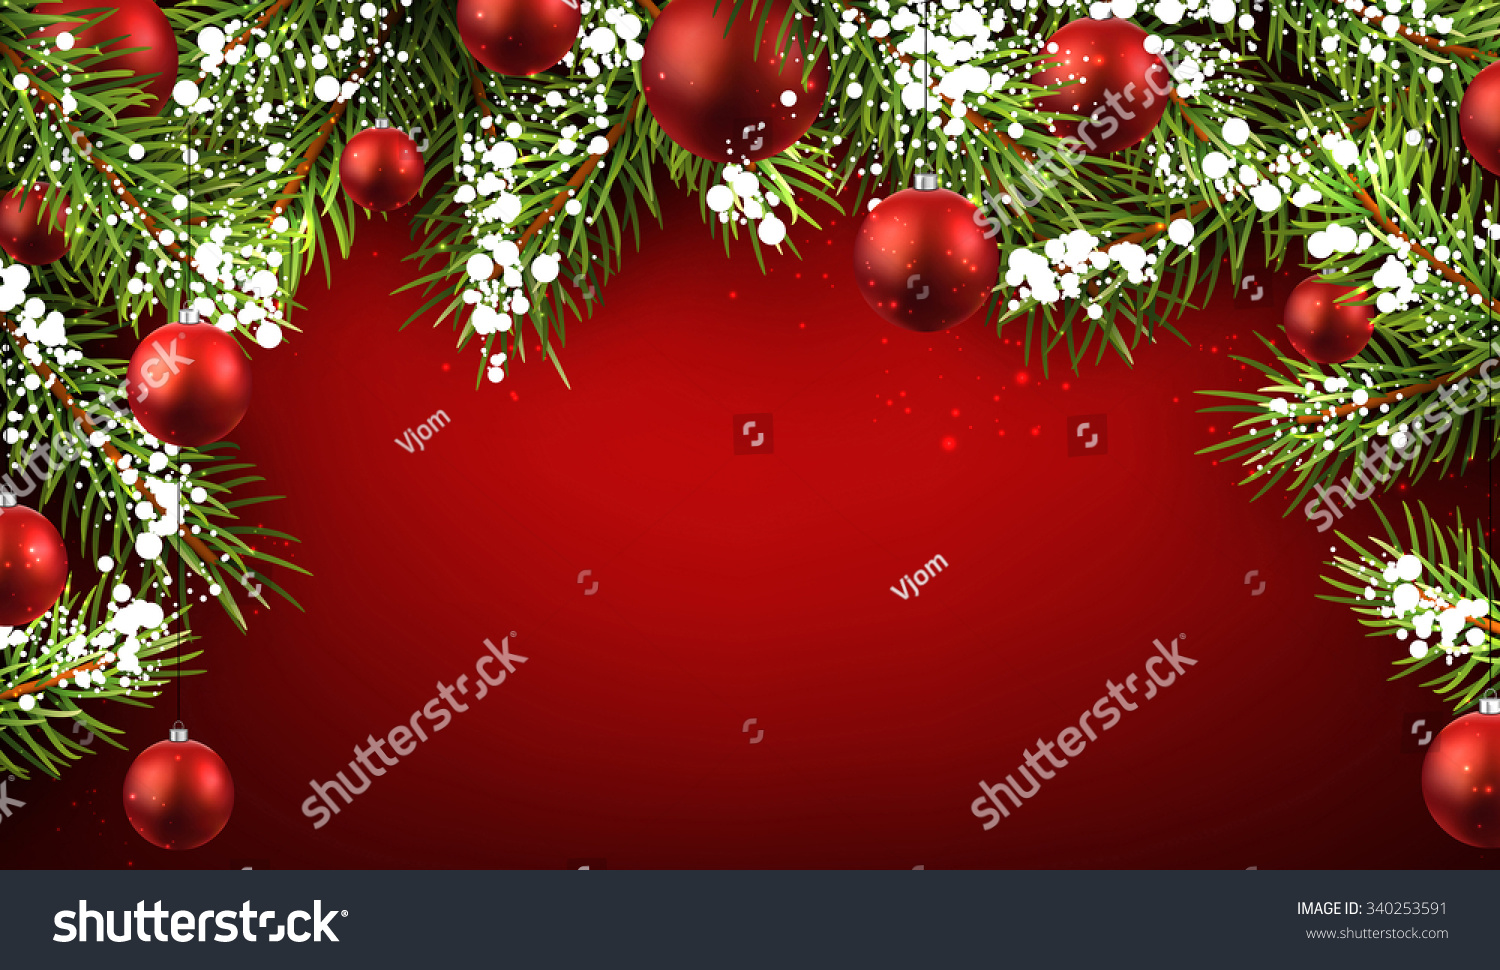 Christmas Red Background Fir Branches Balls Stock Vector (Royalty Free ...